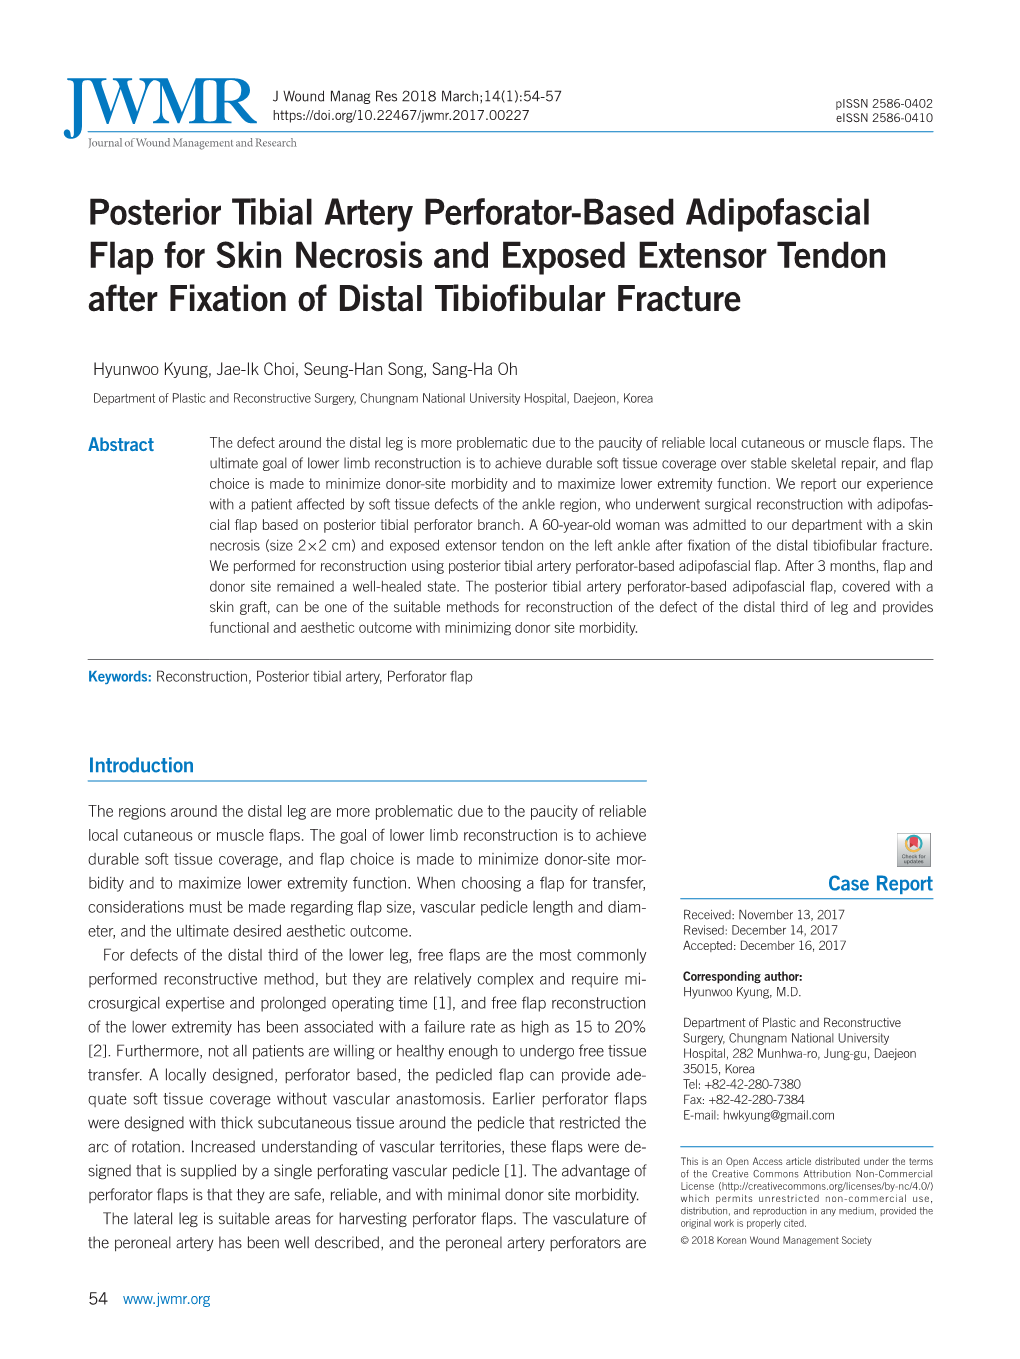 Posterior Tibial Artery Perforator-Based Adipofascial Flap for Skin Necrosis and Exposed Extensor Tendon After Fixation of Distal Tibiofibular Fracture